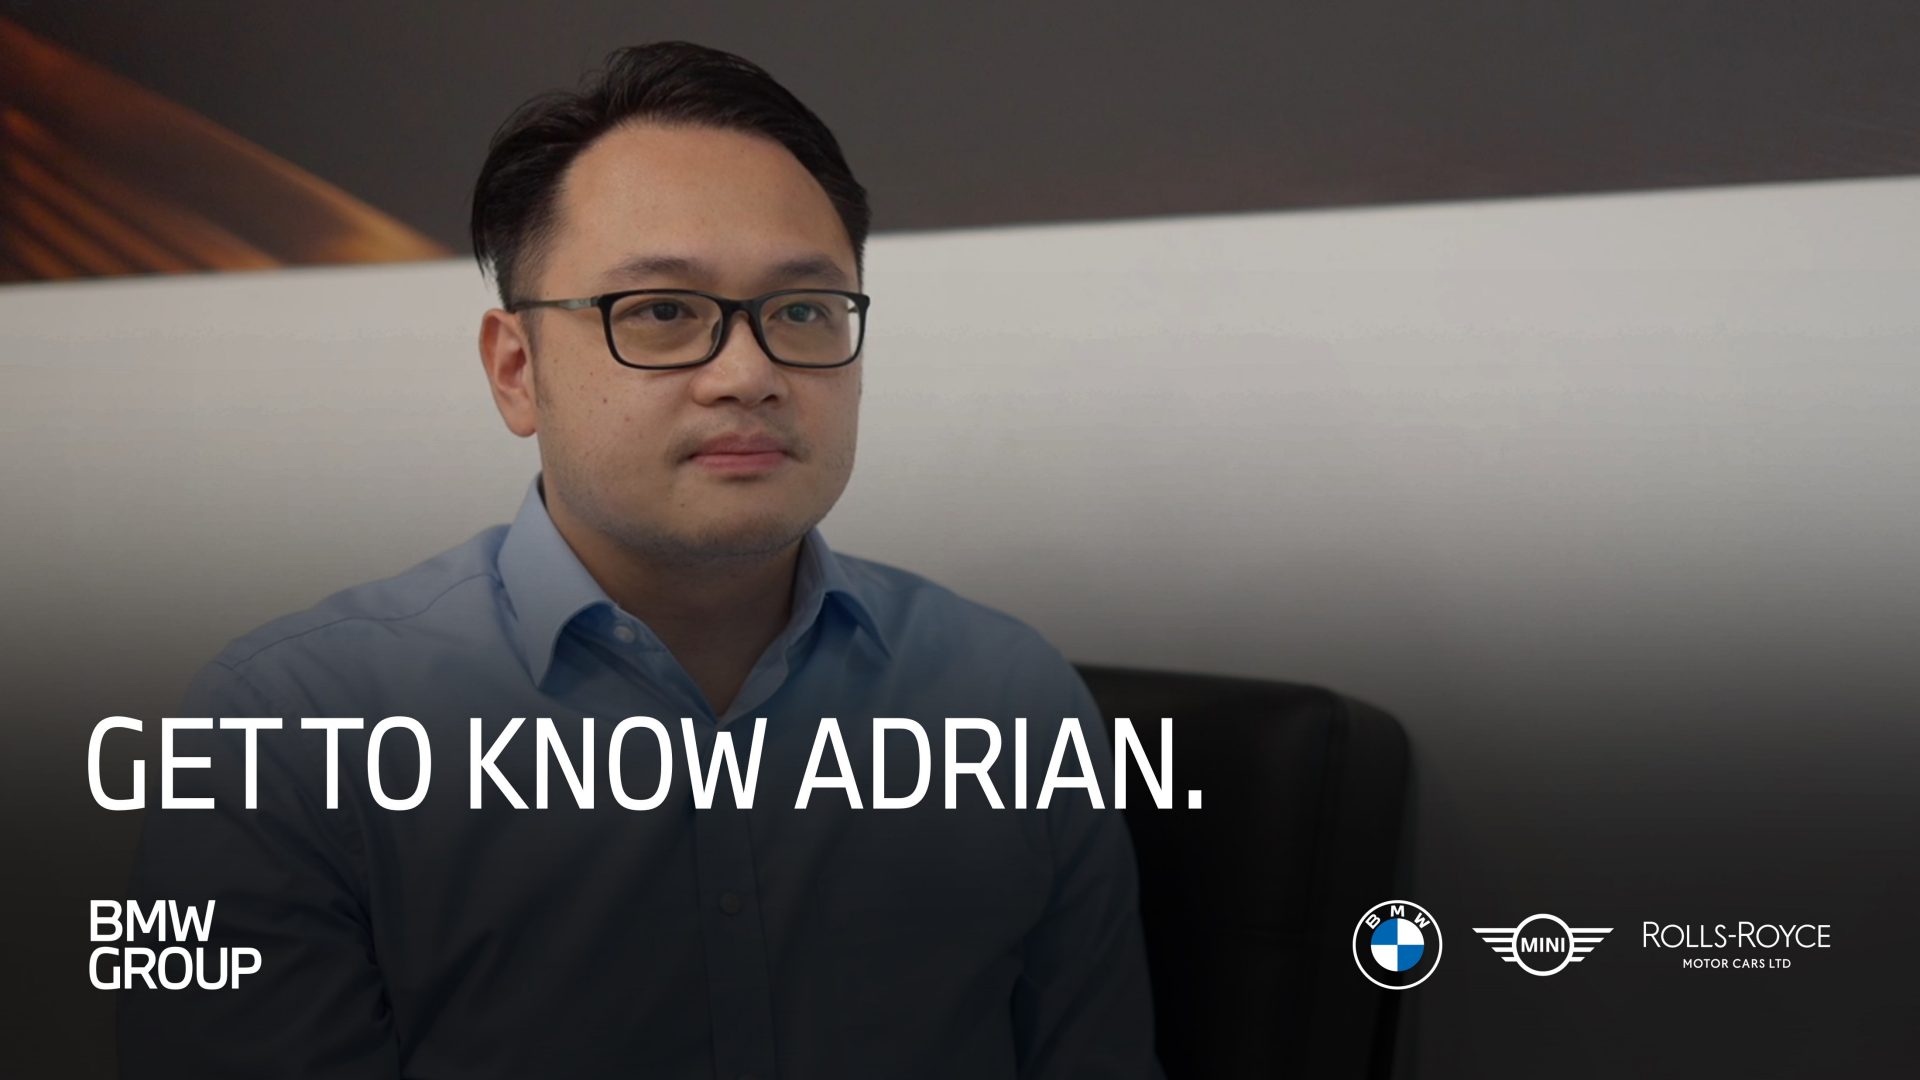 Get to know Adrian.